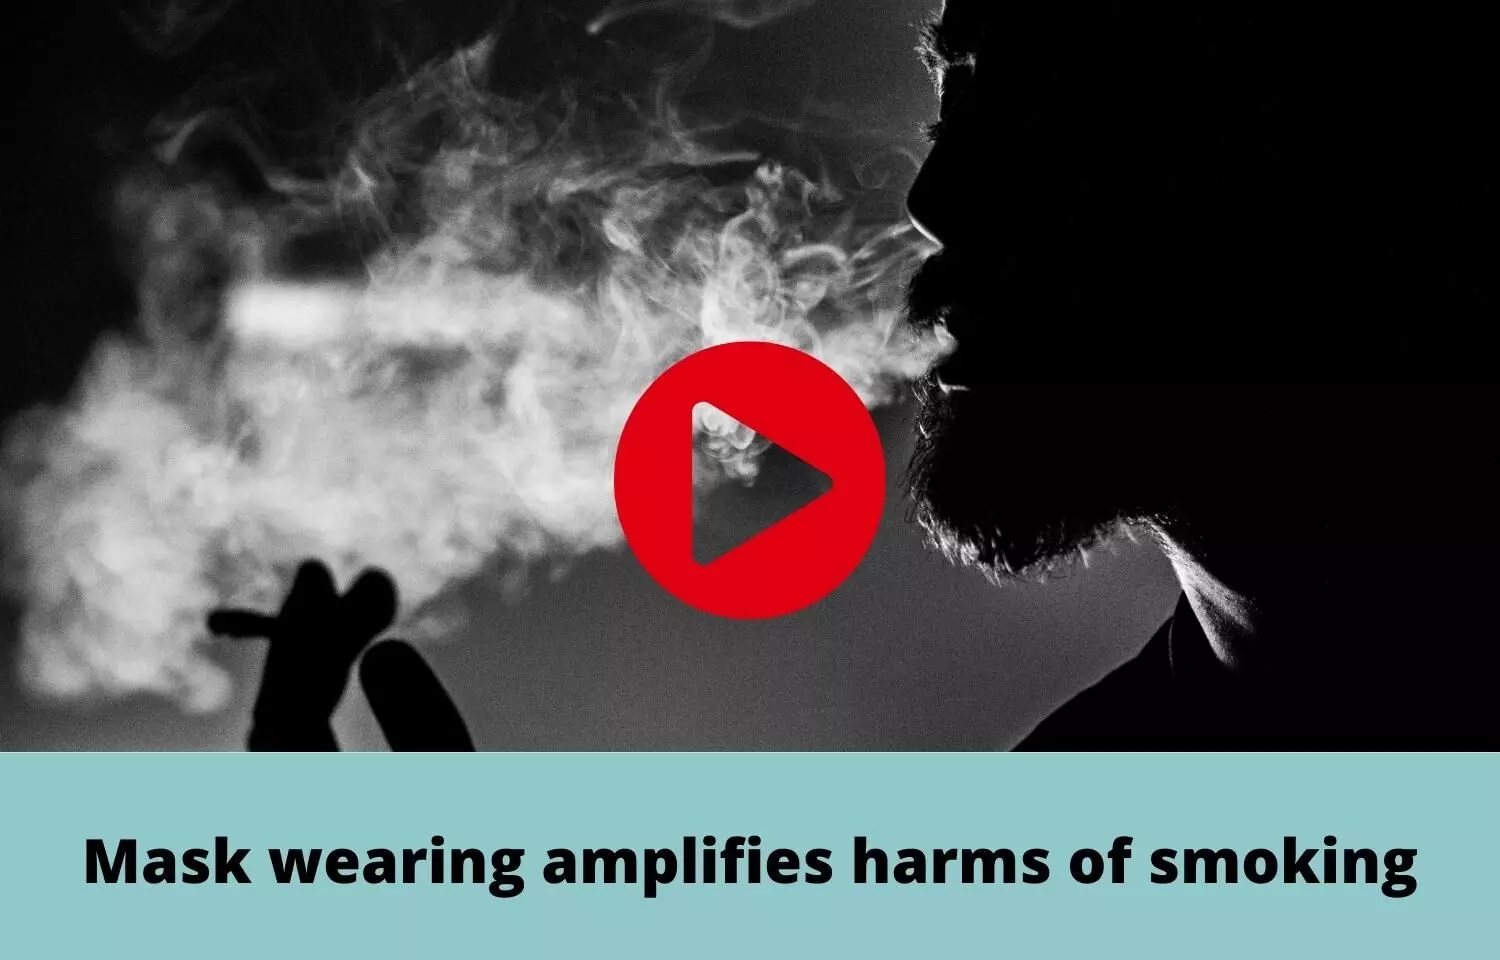 Prolonged surgical mask wearing amplifies harms of smoking, study claims